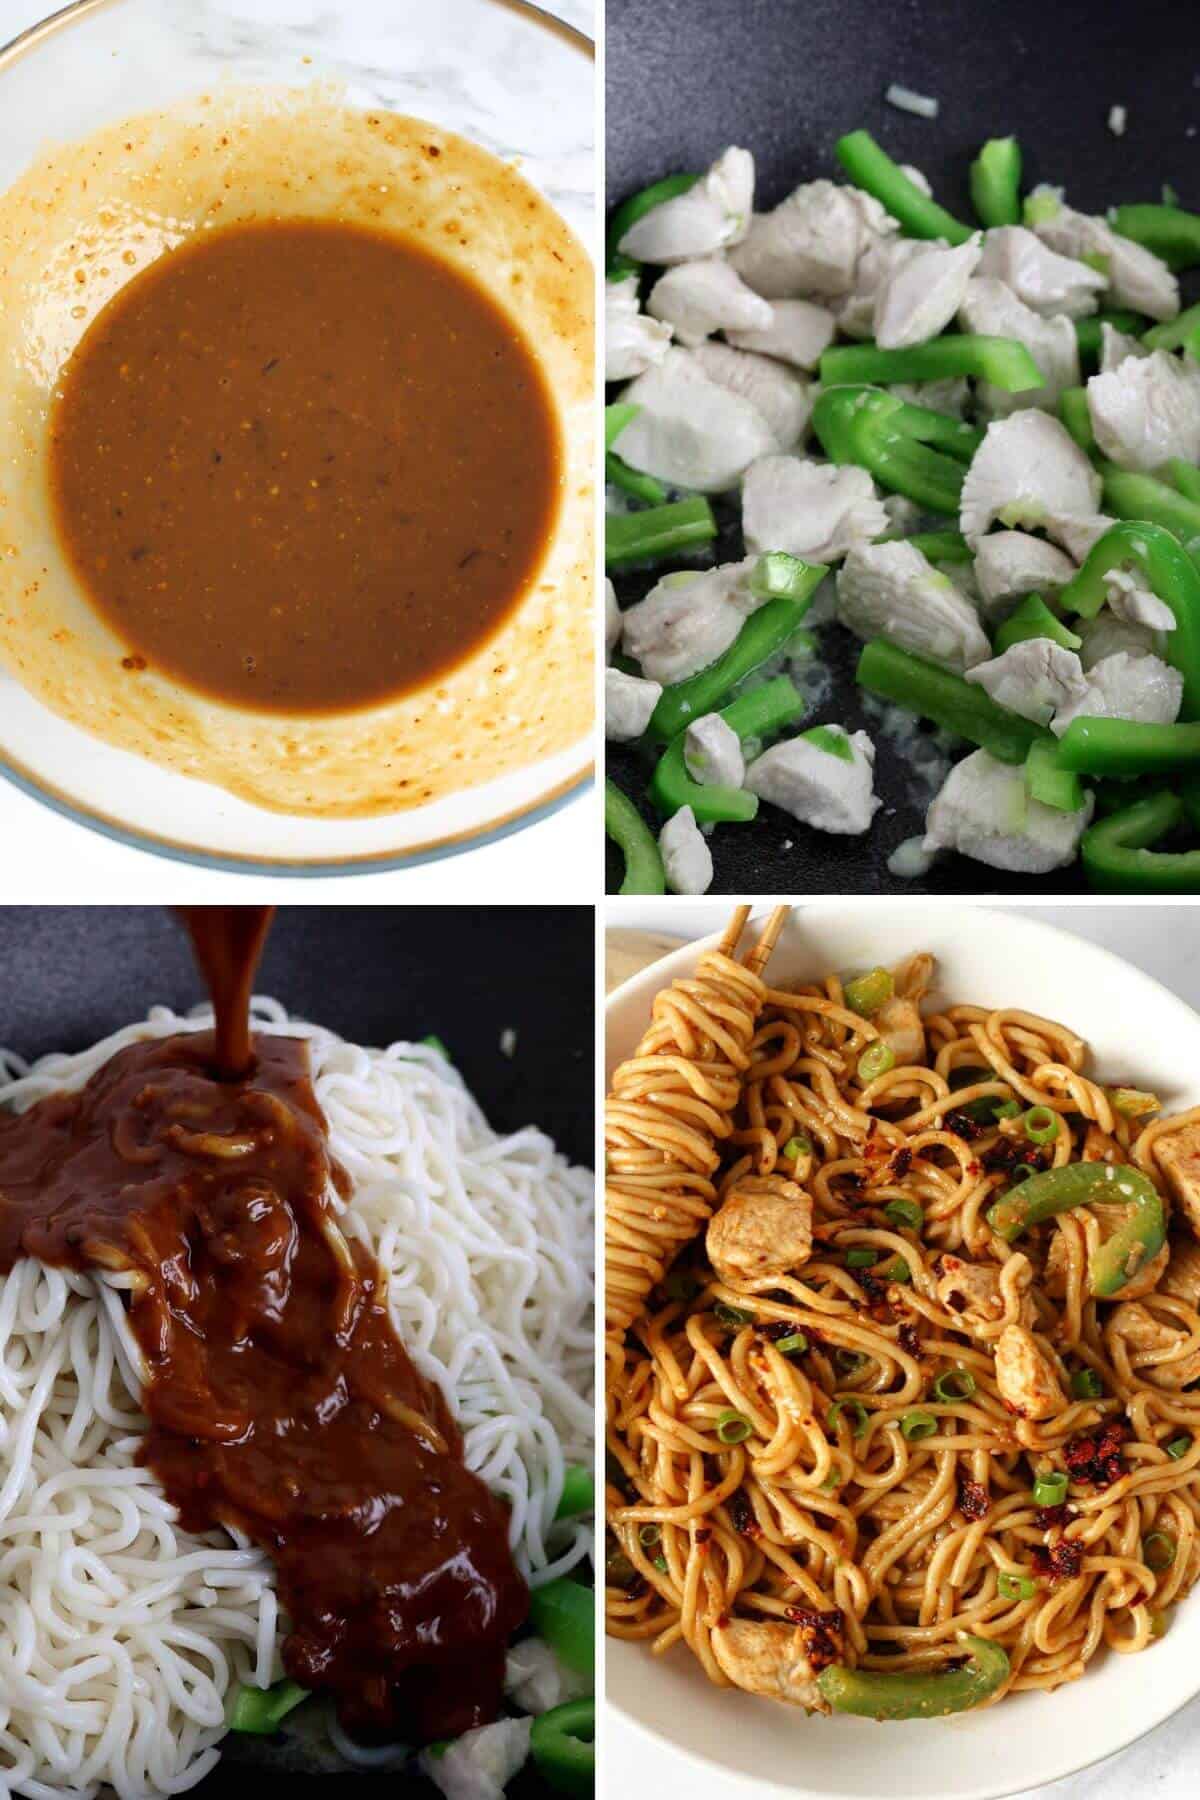 4 photos showing how to make spicy peanut butter noodles step by step